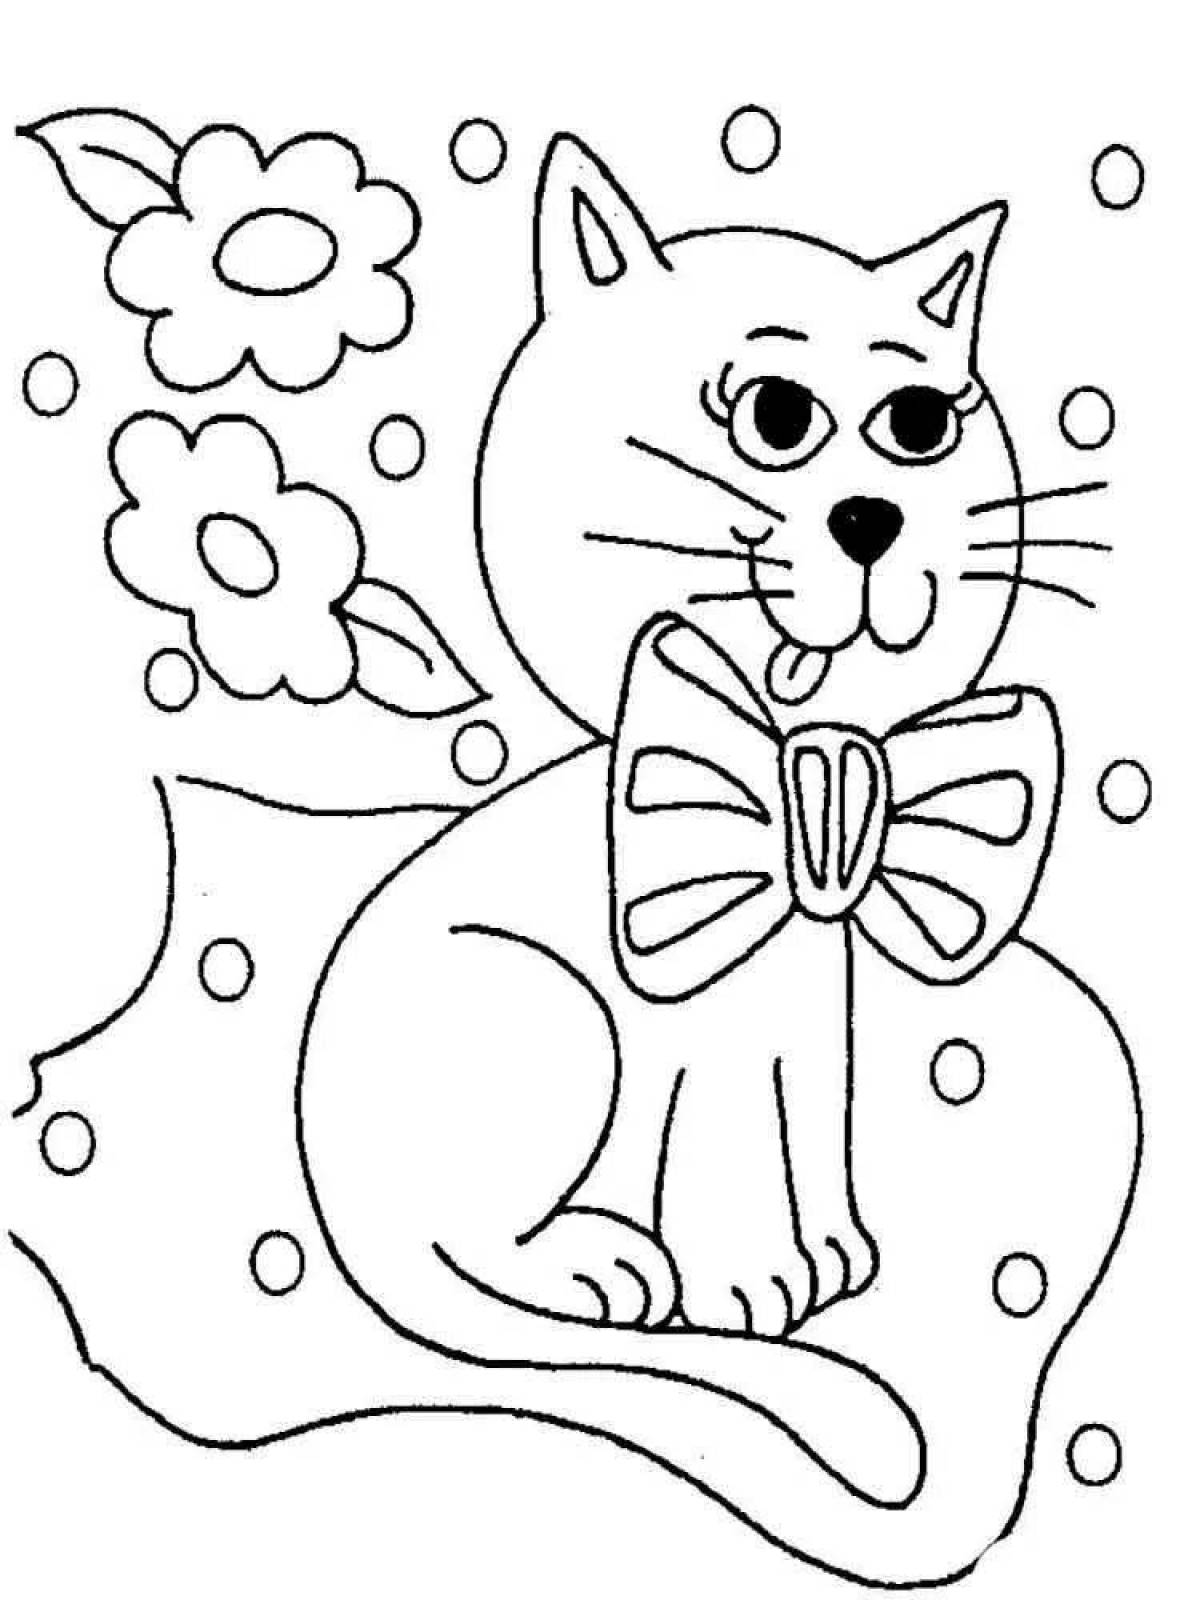 Kitty live coloring for kids